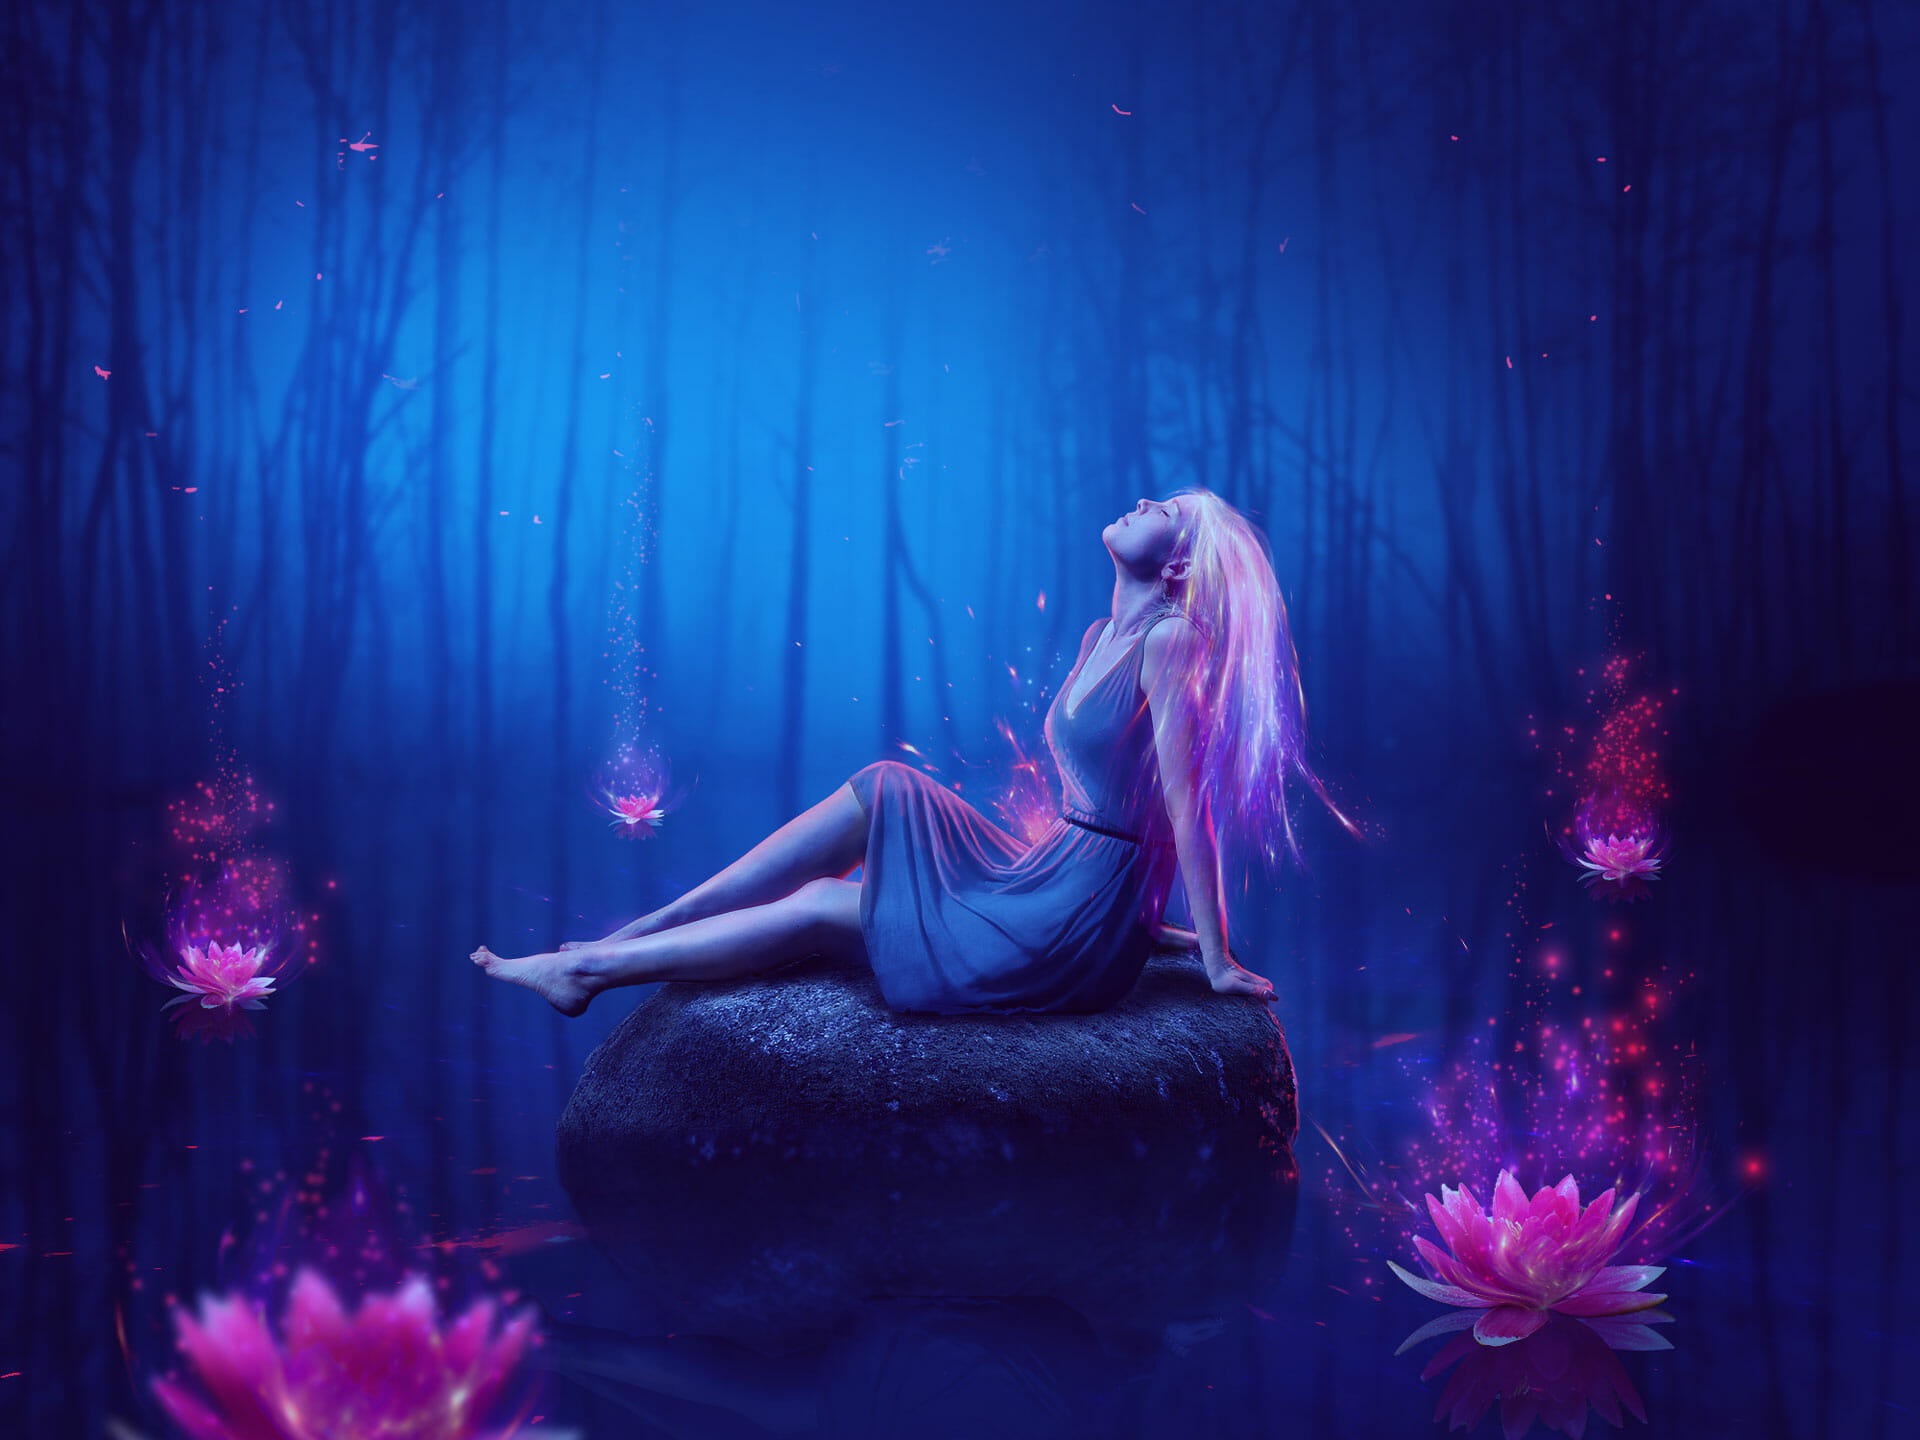 How to Create a Fantasy Lake Scene with Adobe Photoshop